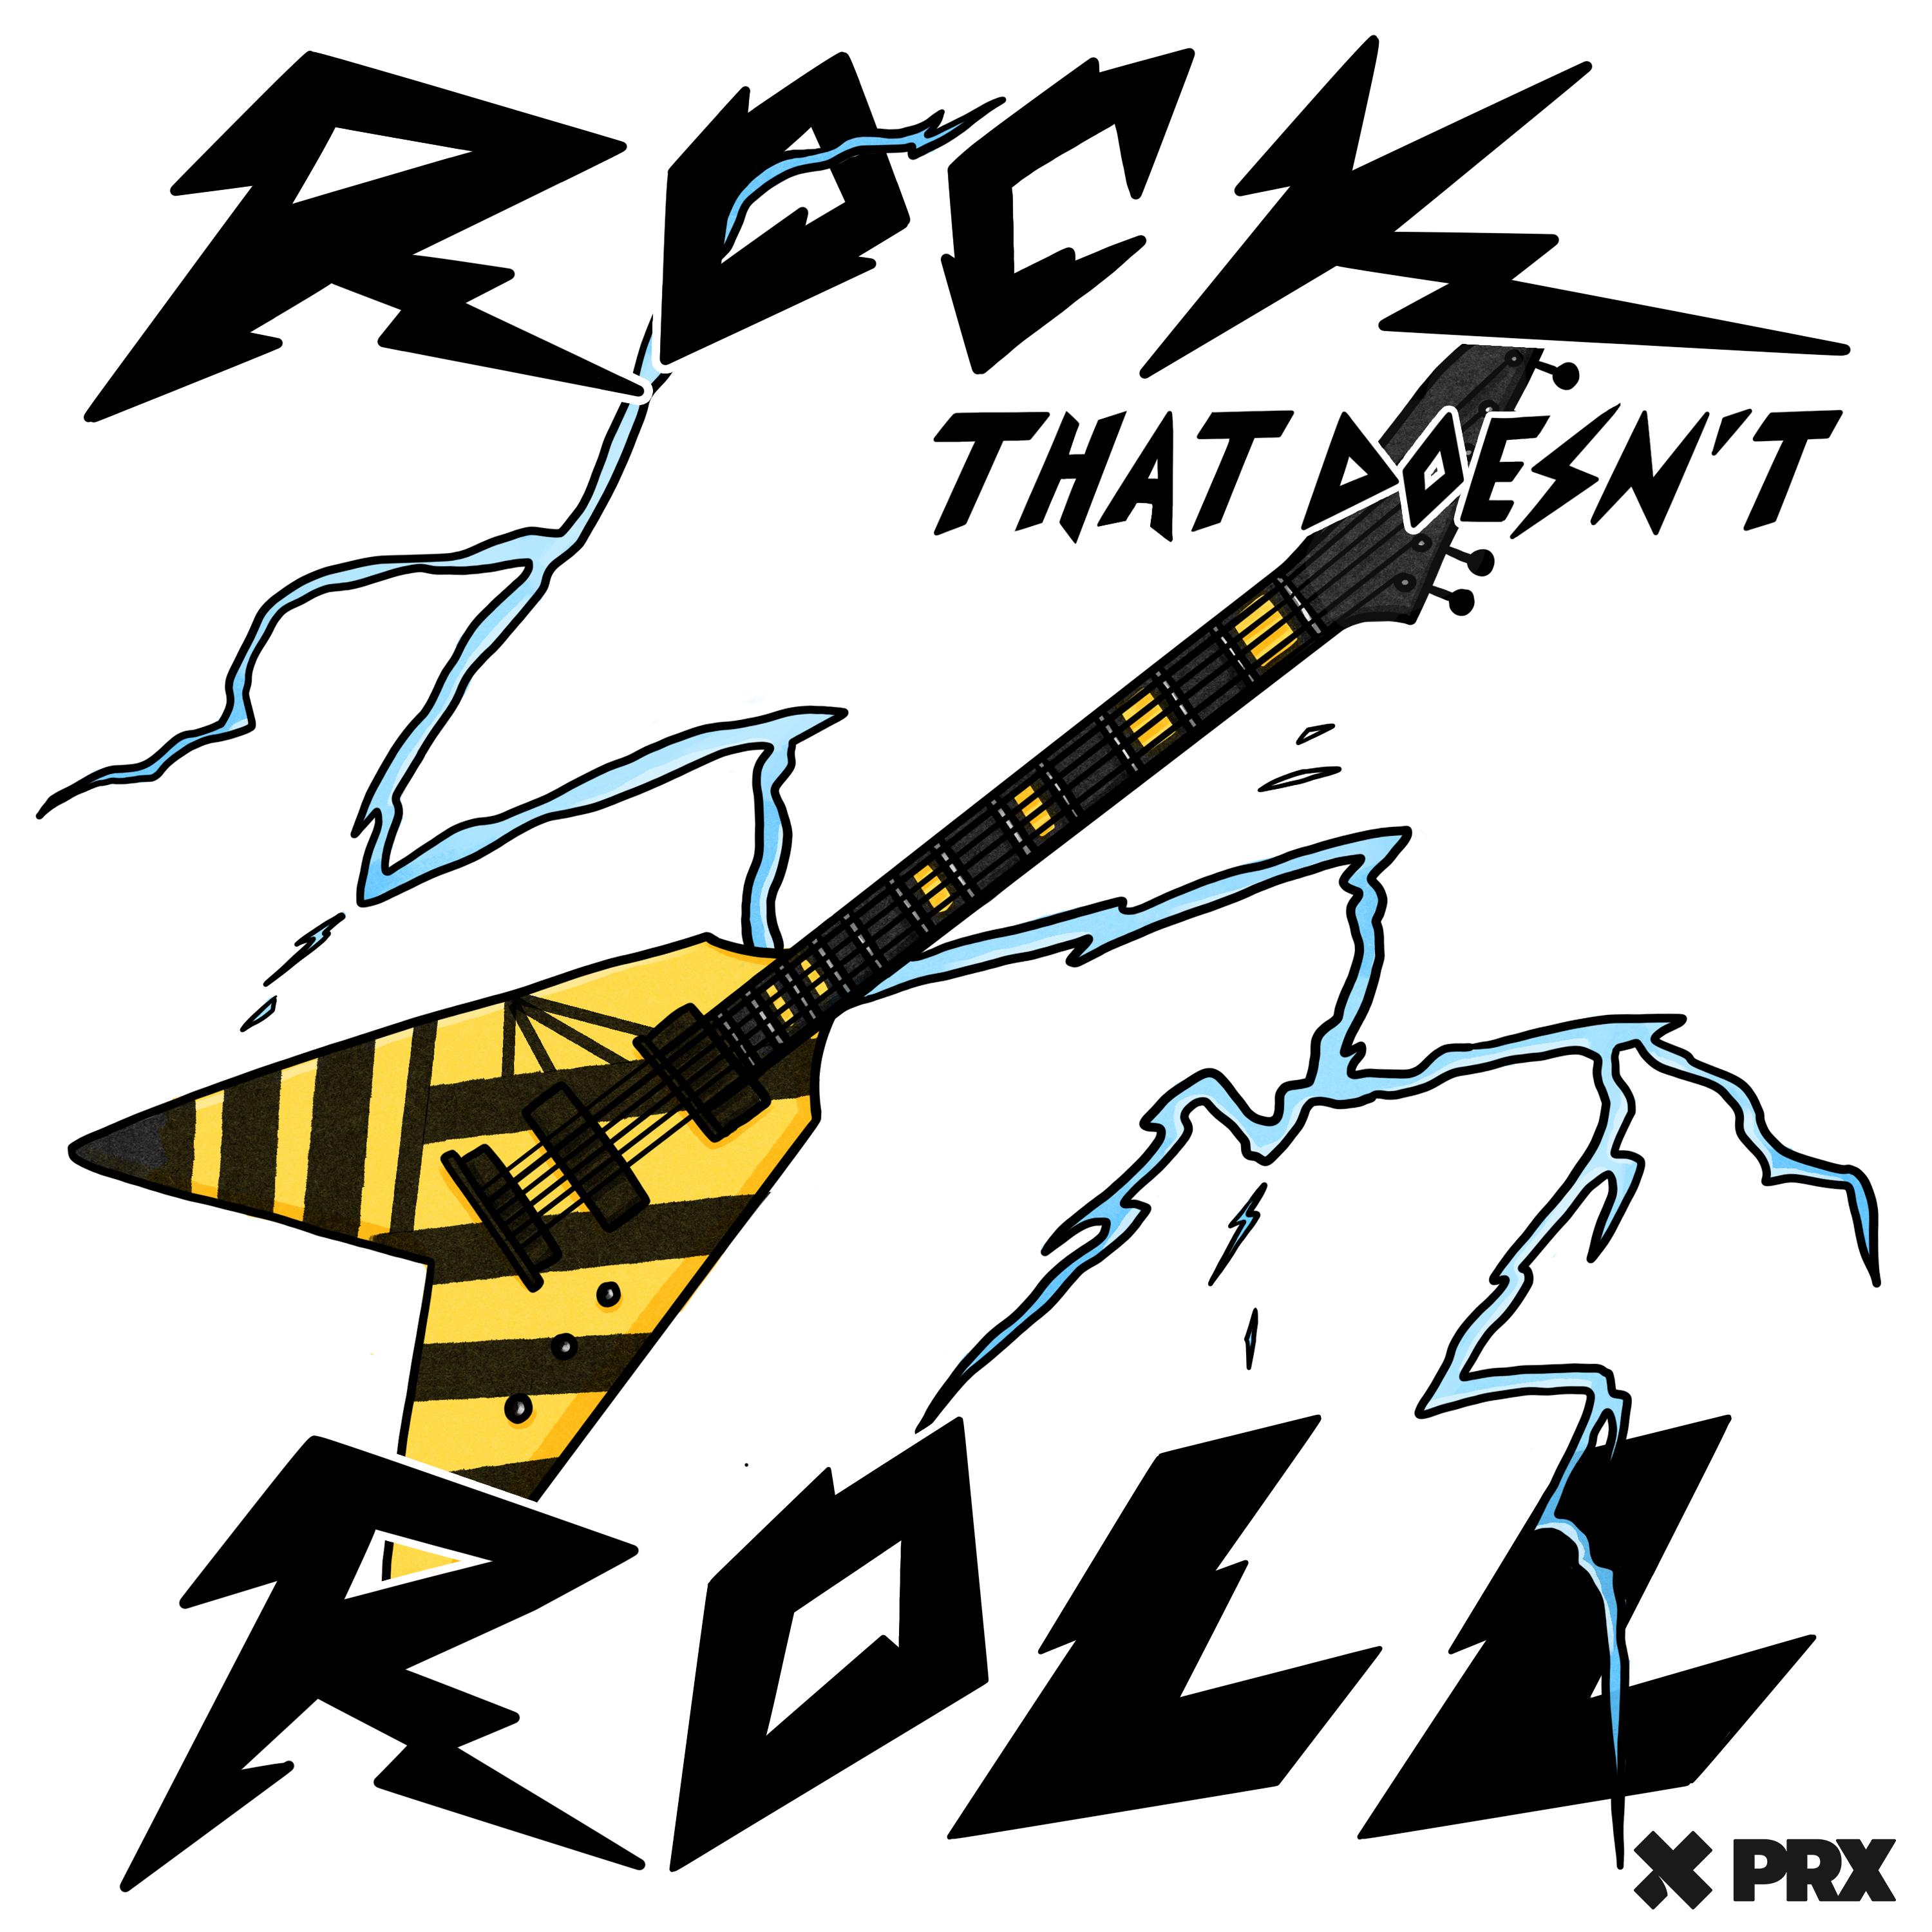 Thumbnail for "Yellow and Black Attack (ft. Michael Sweet of Stryper and Mike Tramp of White Lion)".